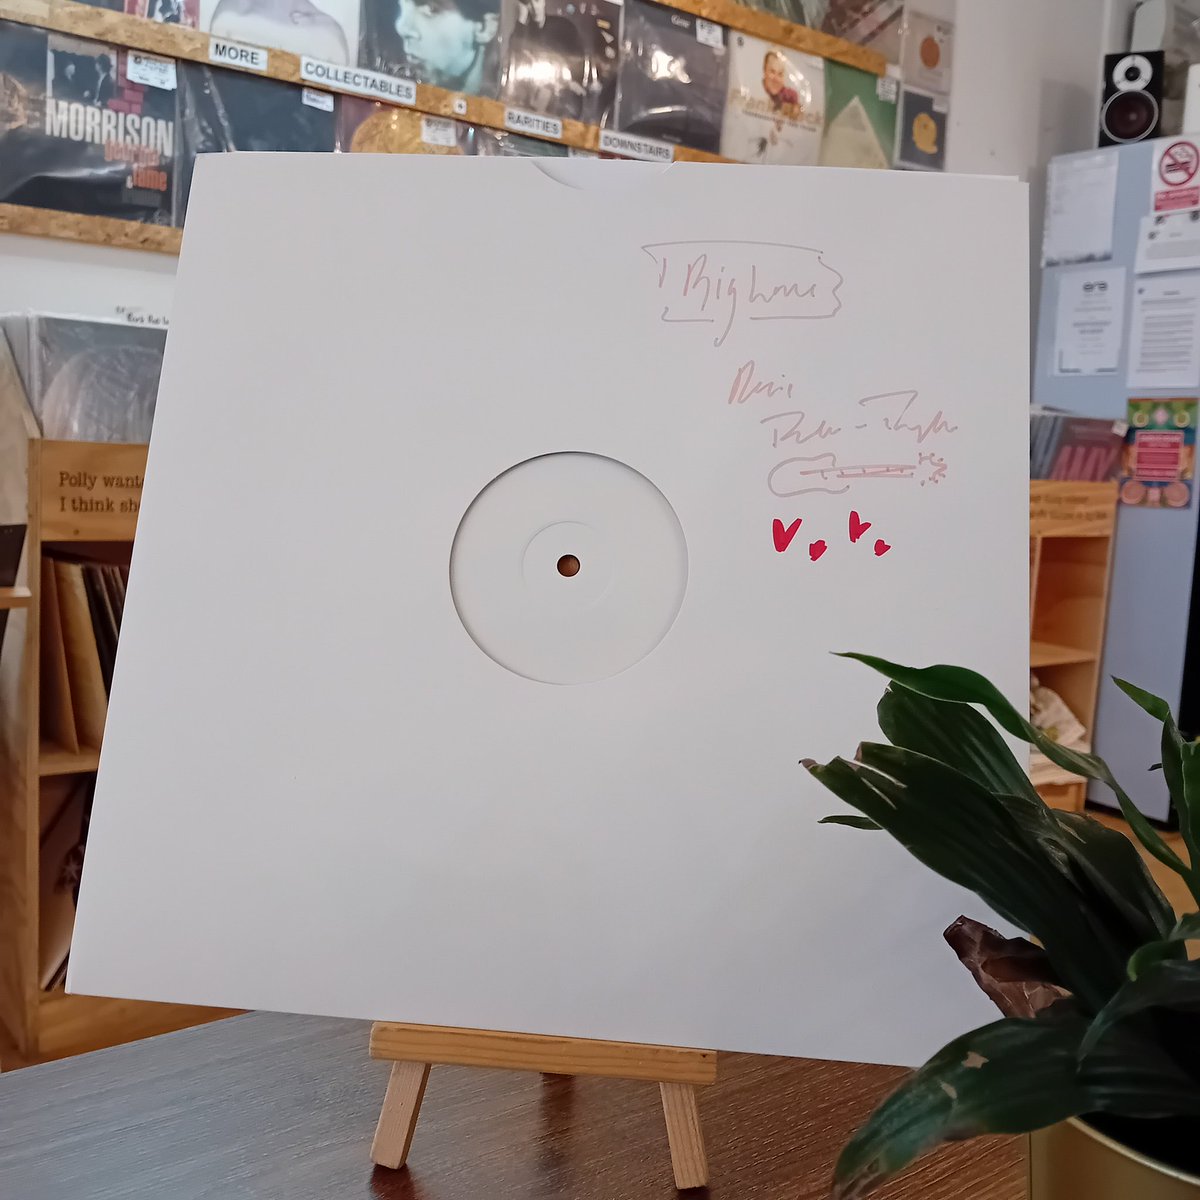 🚨 TEST PRESSING GIVEAWAY 🚨 Fancy getting your hands on this awesome @rfratertaylor test pressing?? Simply follow us + like + RT this post! PLUS, we may have forgotten to announce the @gruffingtonpost test pressing winner 🙄 congrats to @anth25lowe ! DM to claim your prize!